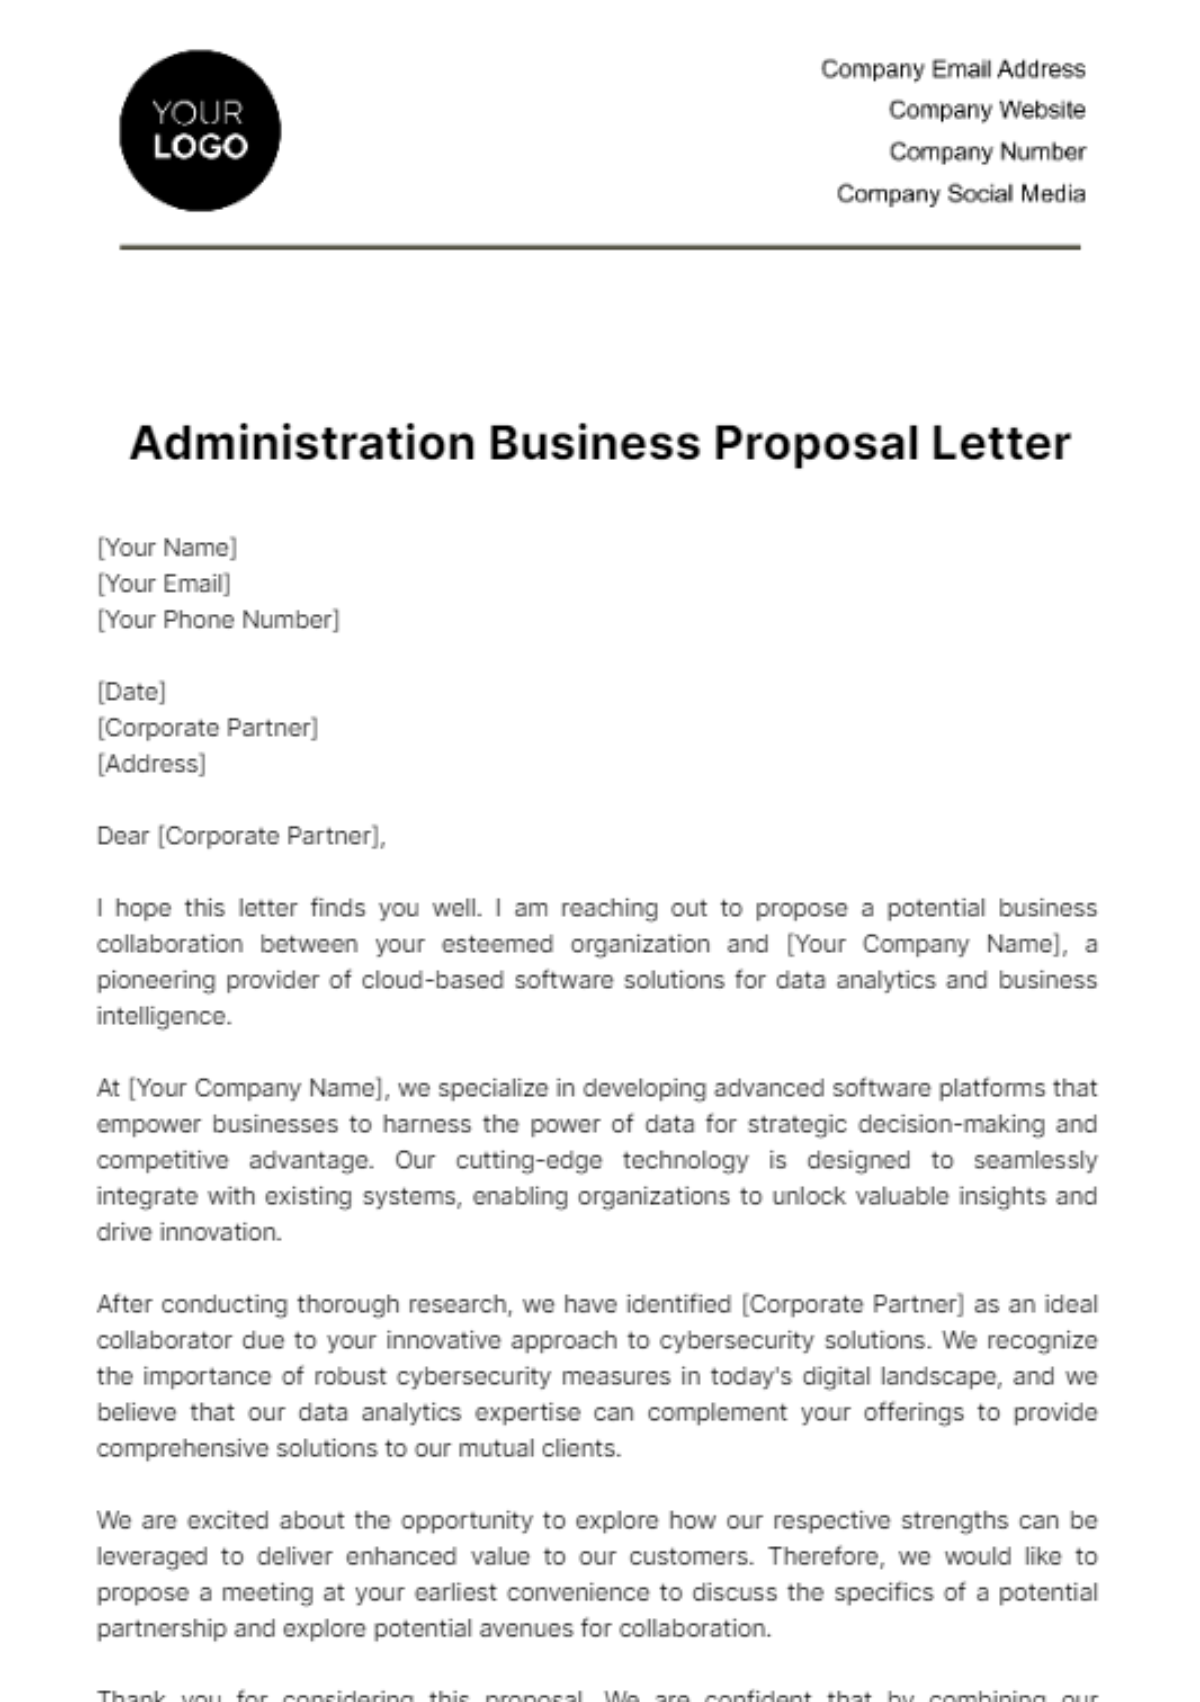 Administration Business Proposal Letter Template